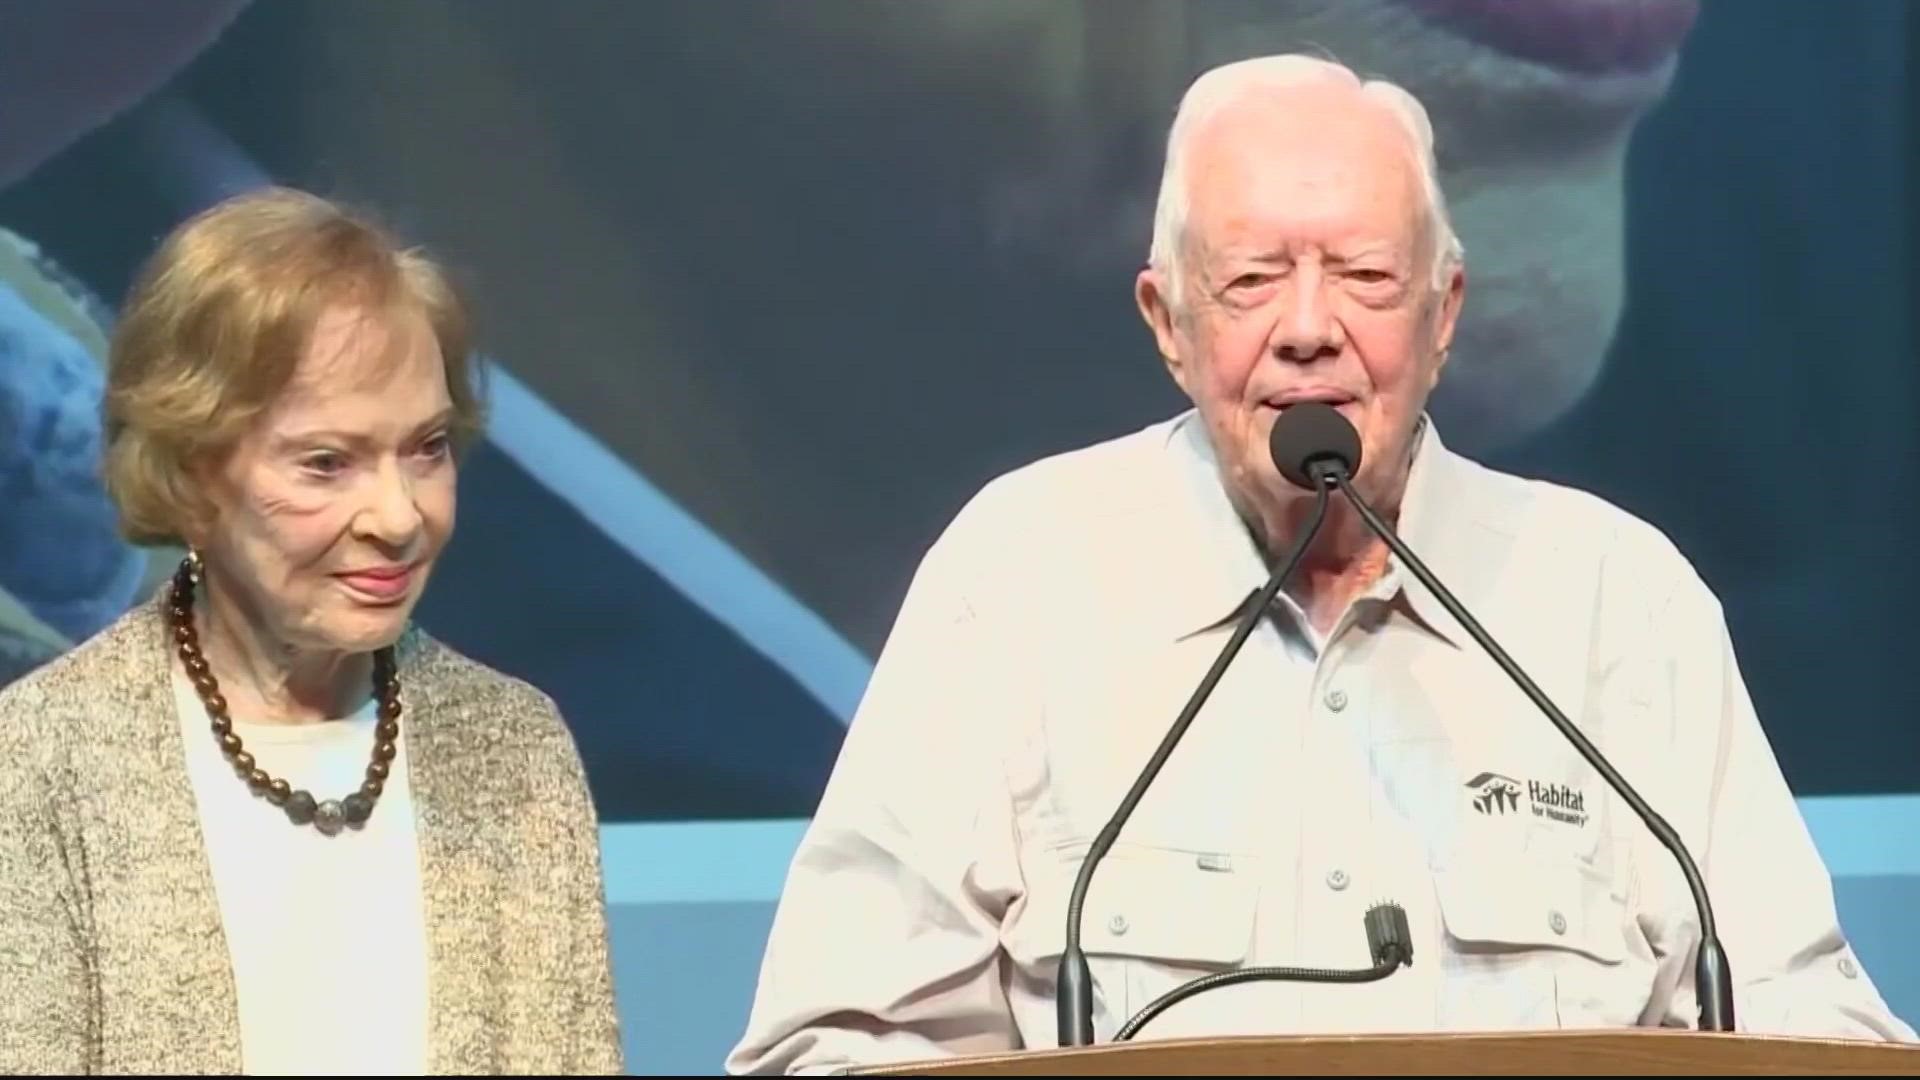 Former President Jimmy Carter, who at 98 years old is the longest-lived American president, has entered home hospice care in Plains, Georgia.